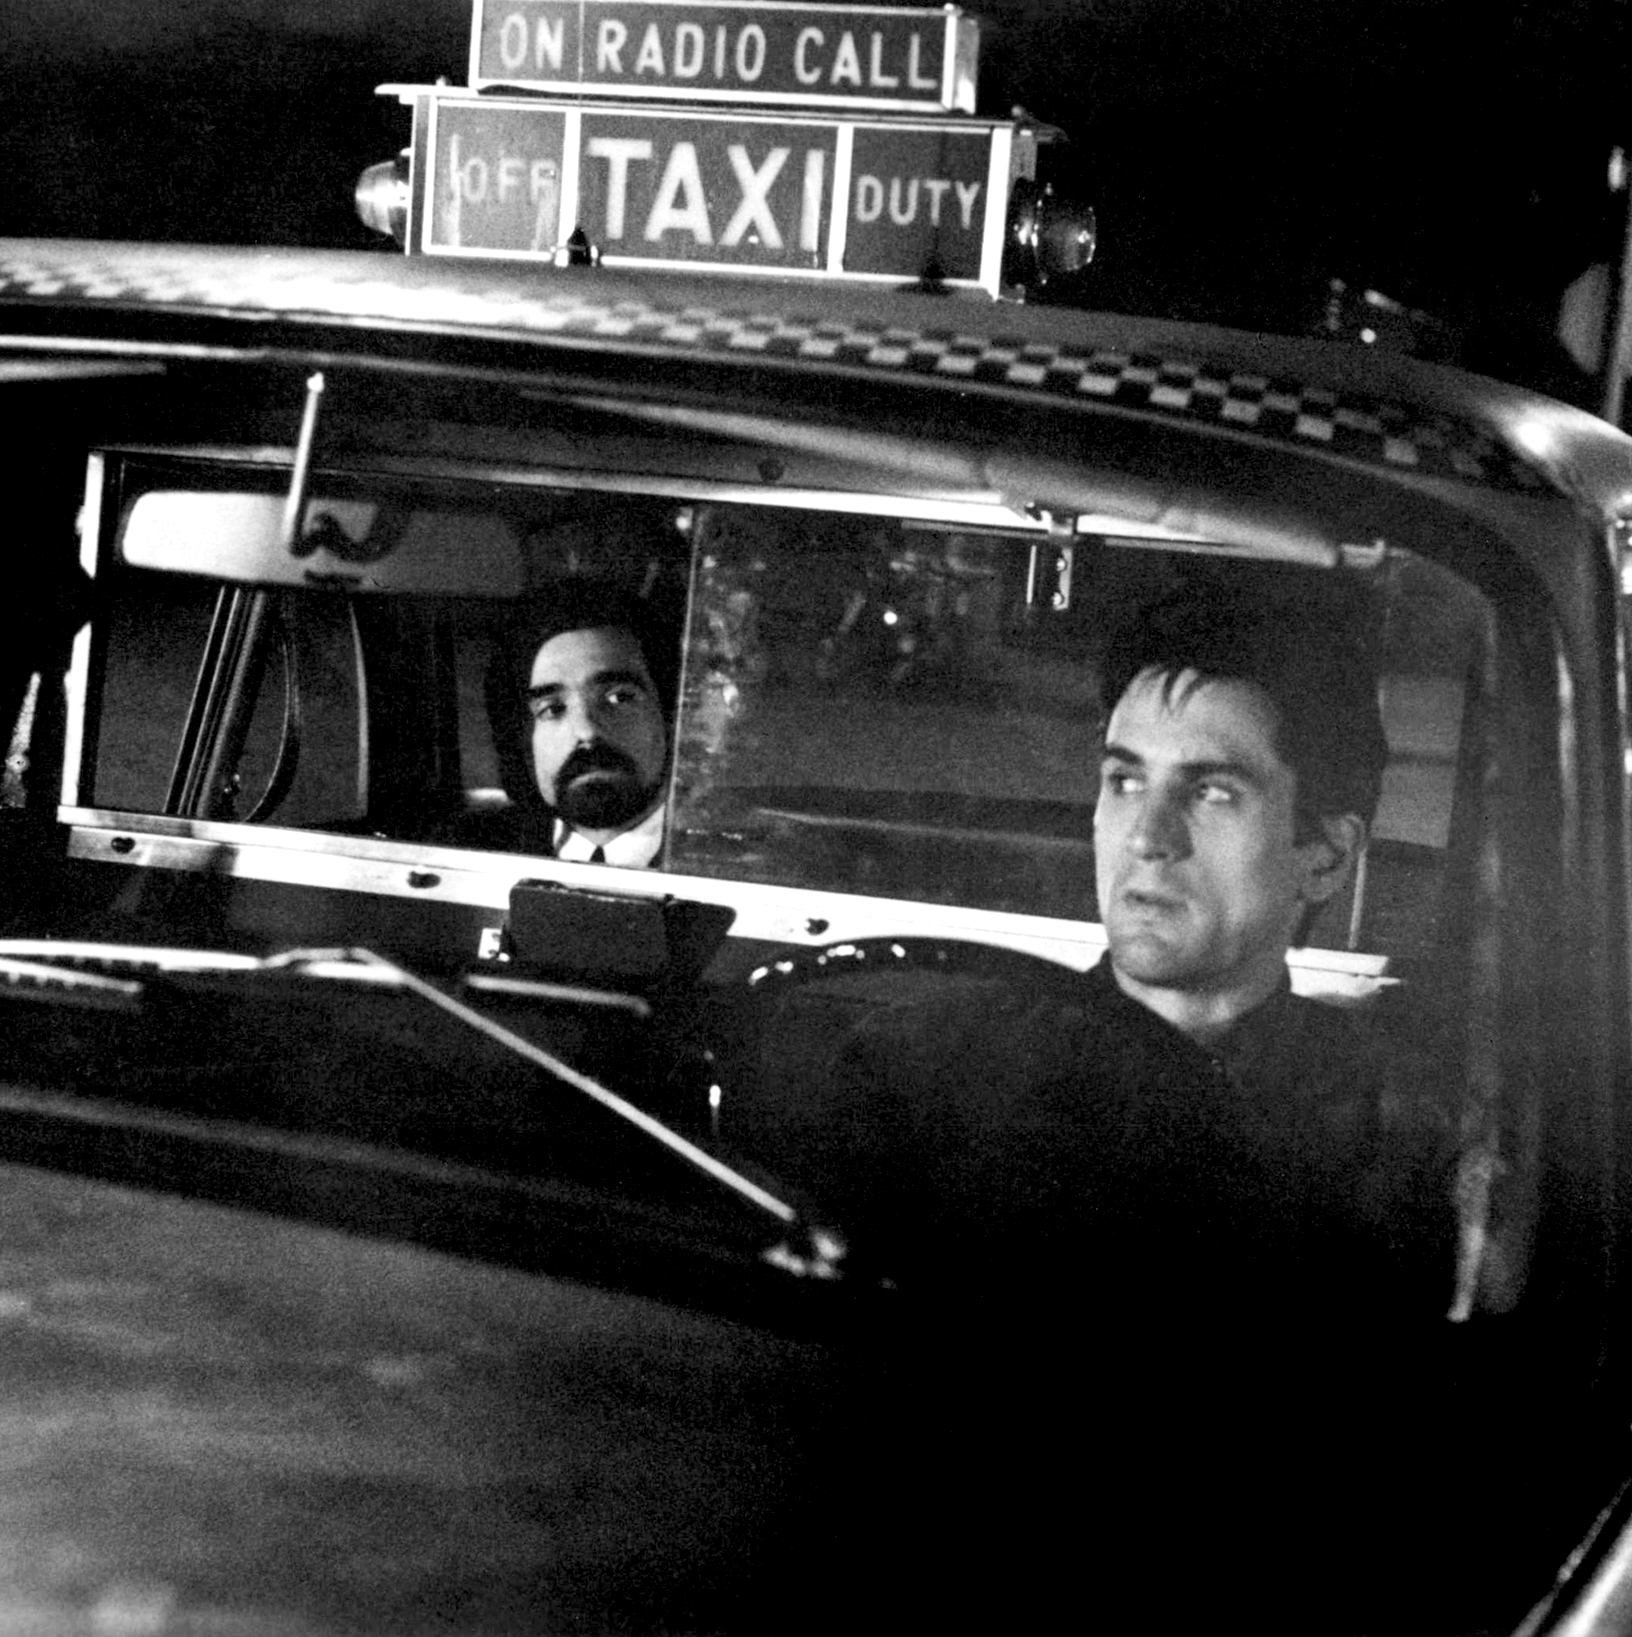 Behind the Scenes of Martin Scorsese's Taxi Driver: A Classic 1975